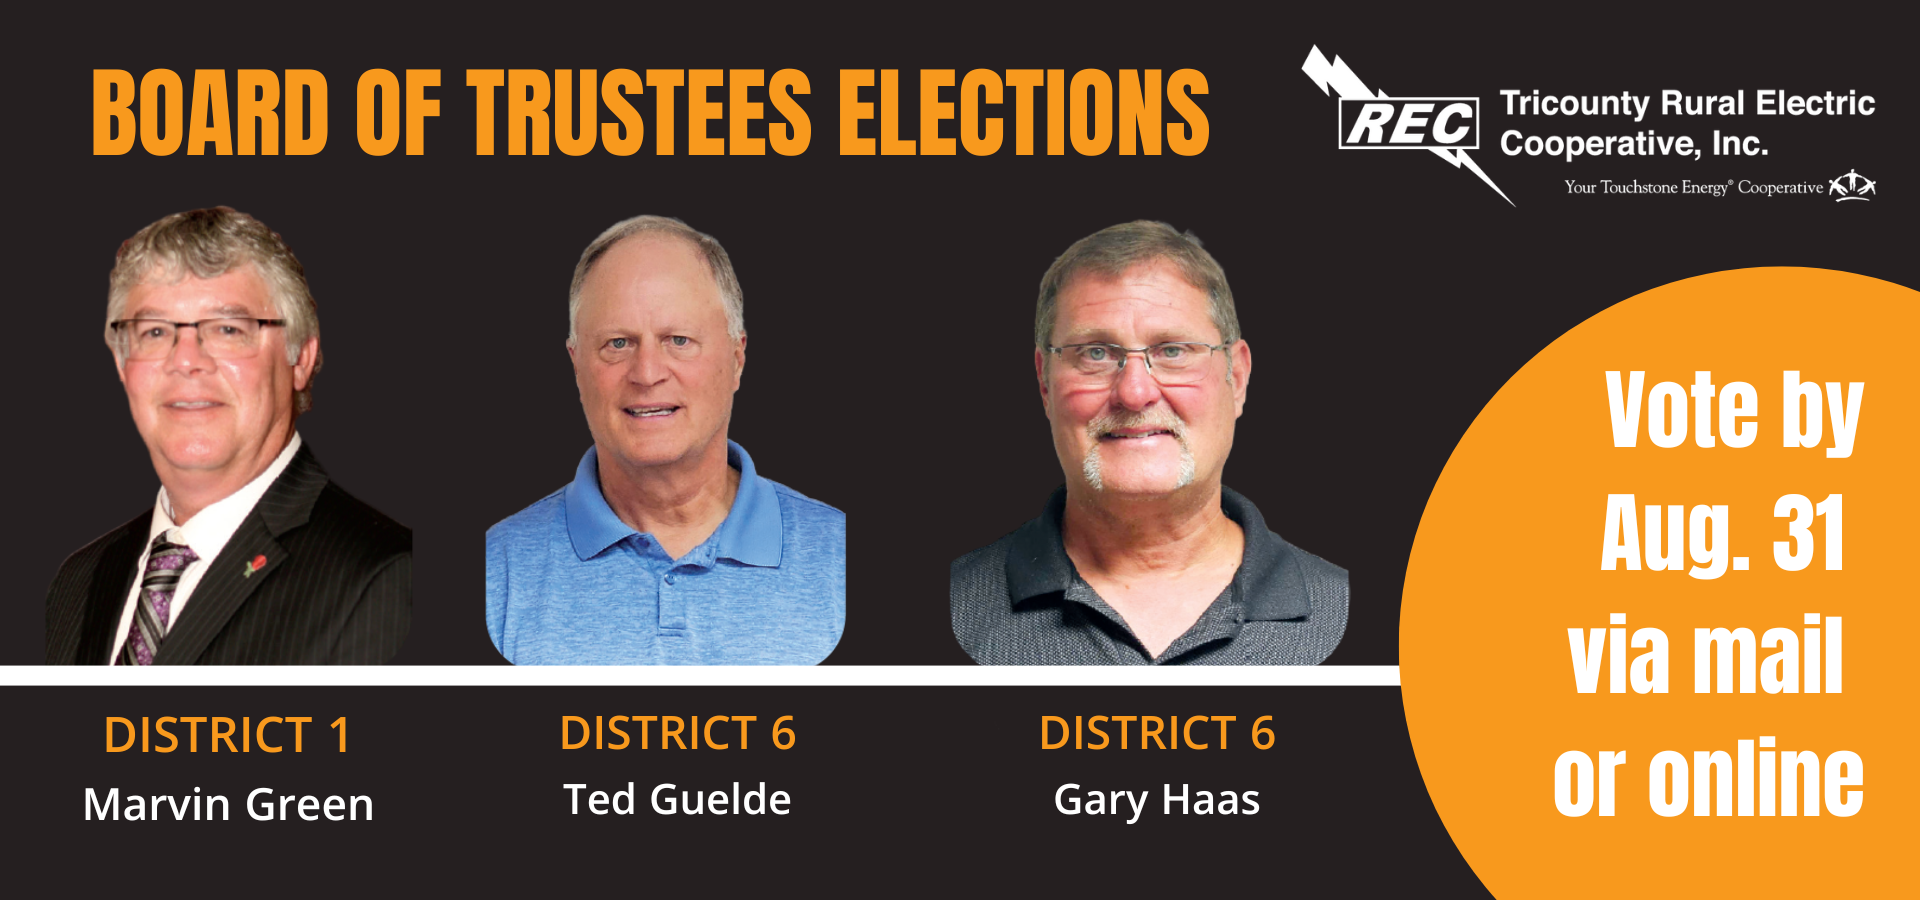 Cast your vote for trustees by Aug. 31